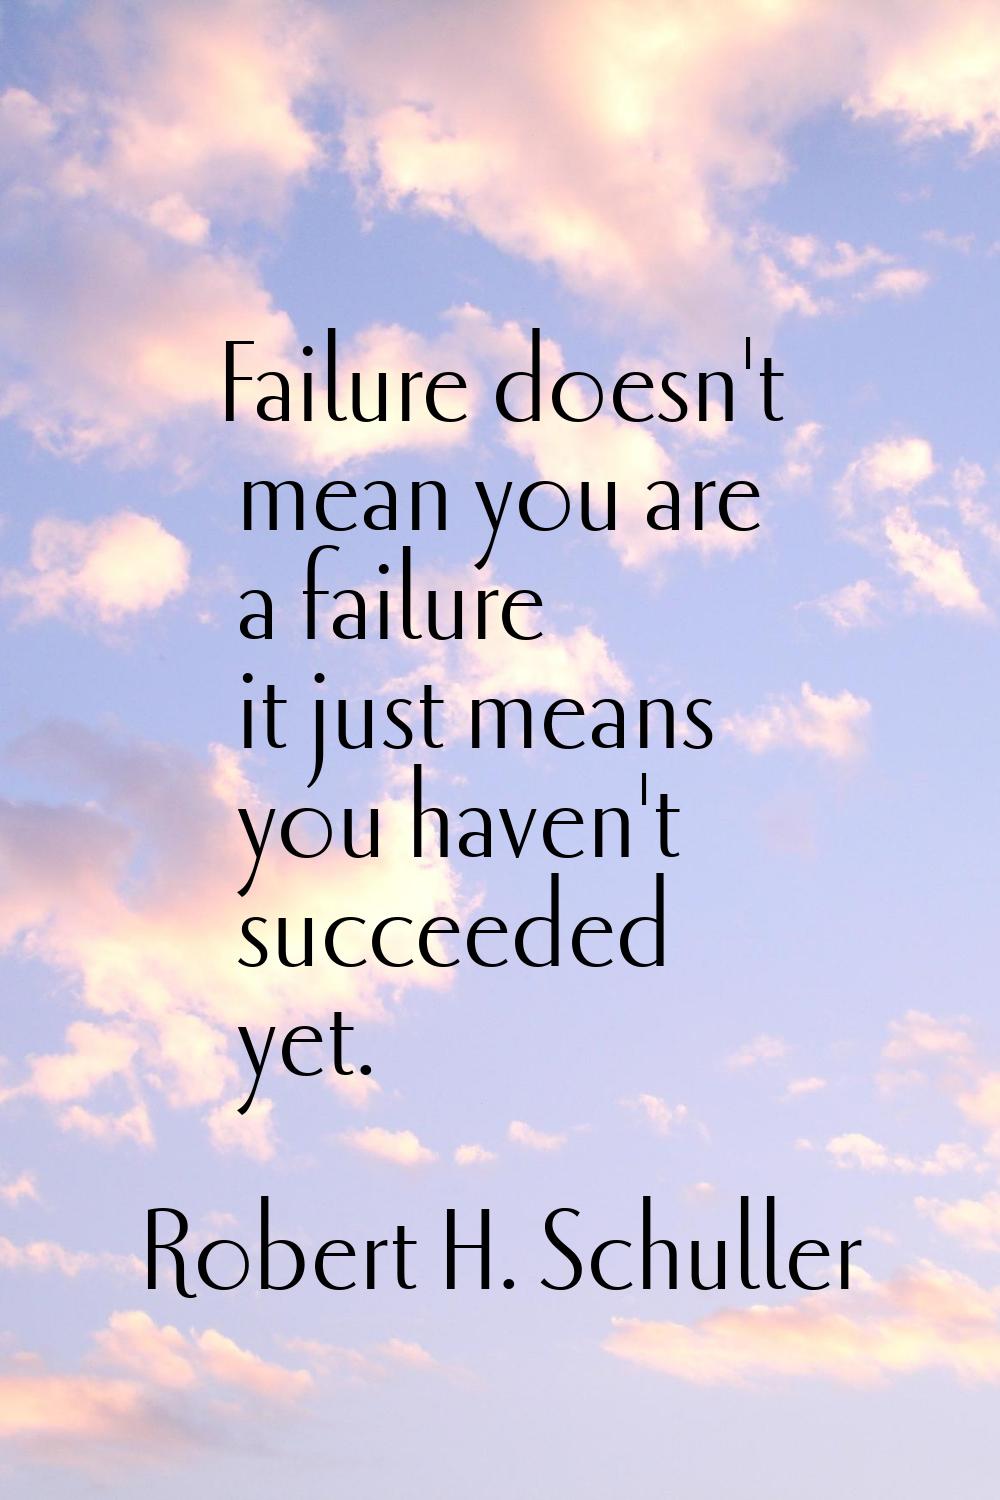 Failure doesn't mean you are a failure it just means you haven't succeeded yet.